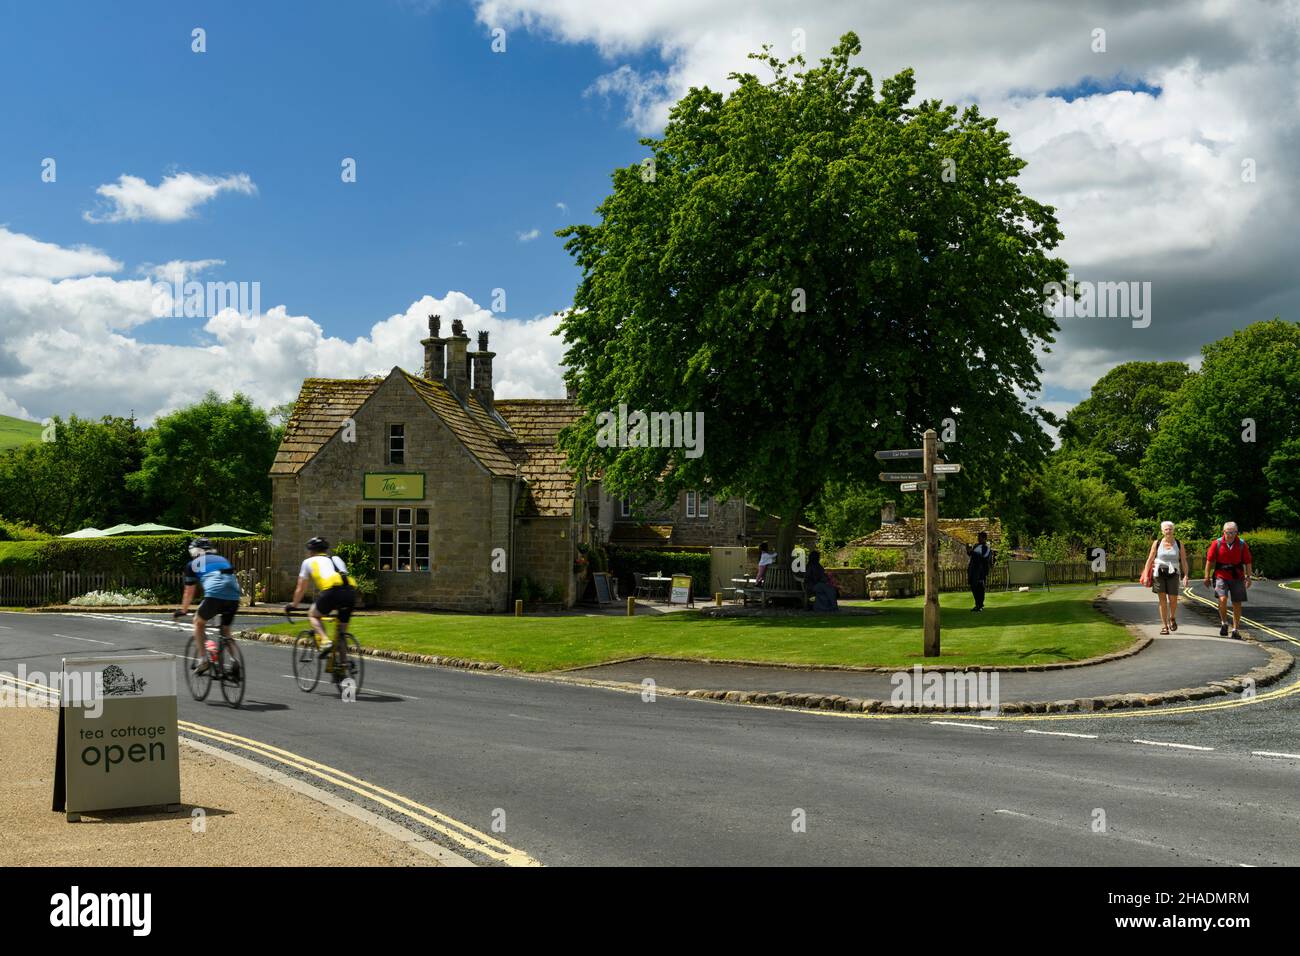 2 cyclists & walkers passing quaint attractive cottage tea rooms cafe in scenic sunny rural village - B6160 Bolton Abbey, Yorkshire Dales, England UK. Stock Photo